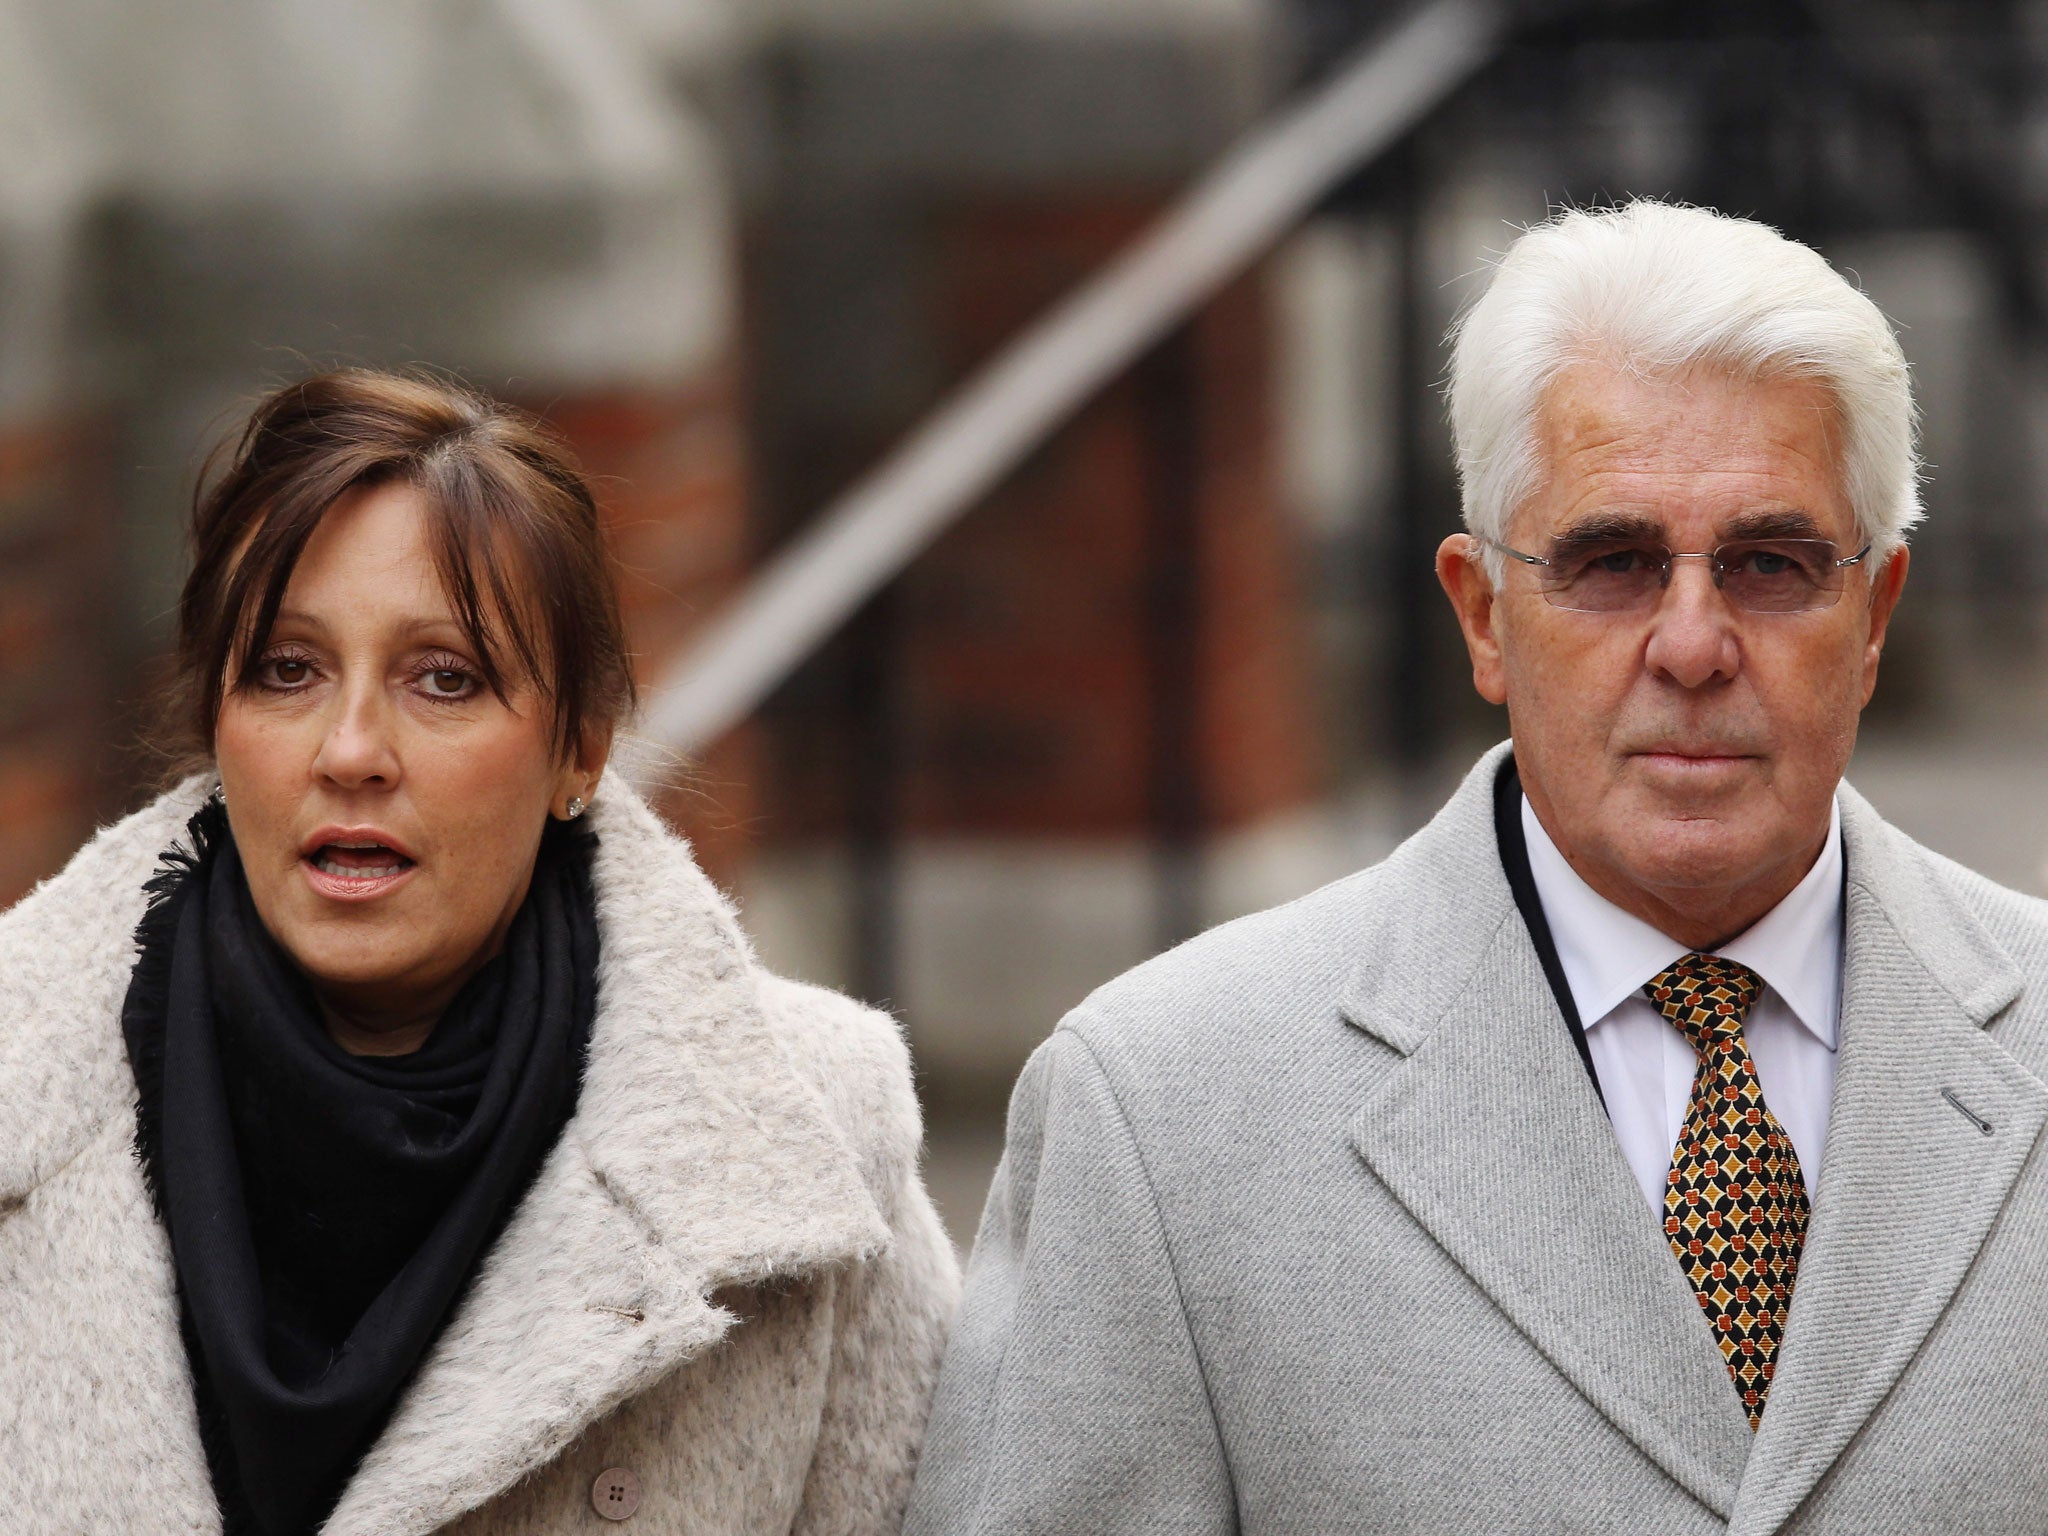 Jo Clifford, left, the wife of the disgraced publicist Max Clifford, right, is seeking a divorce after her husband was convicted for sex attacks